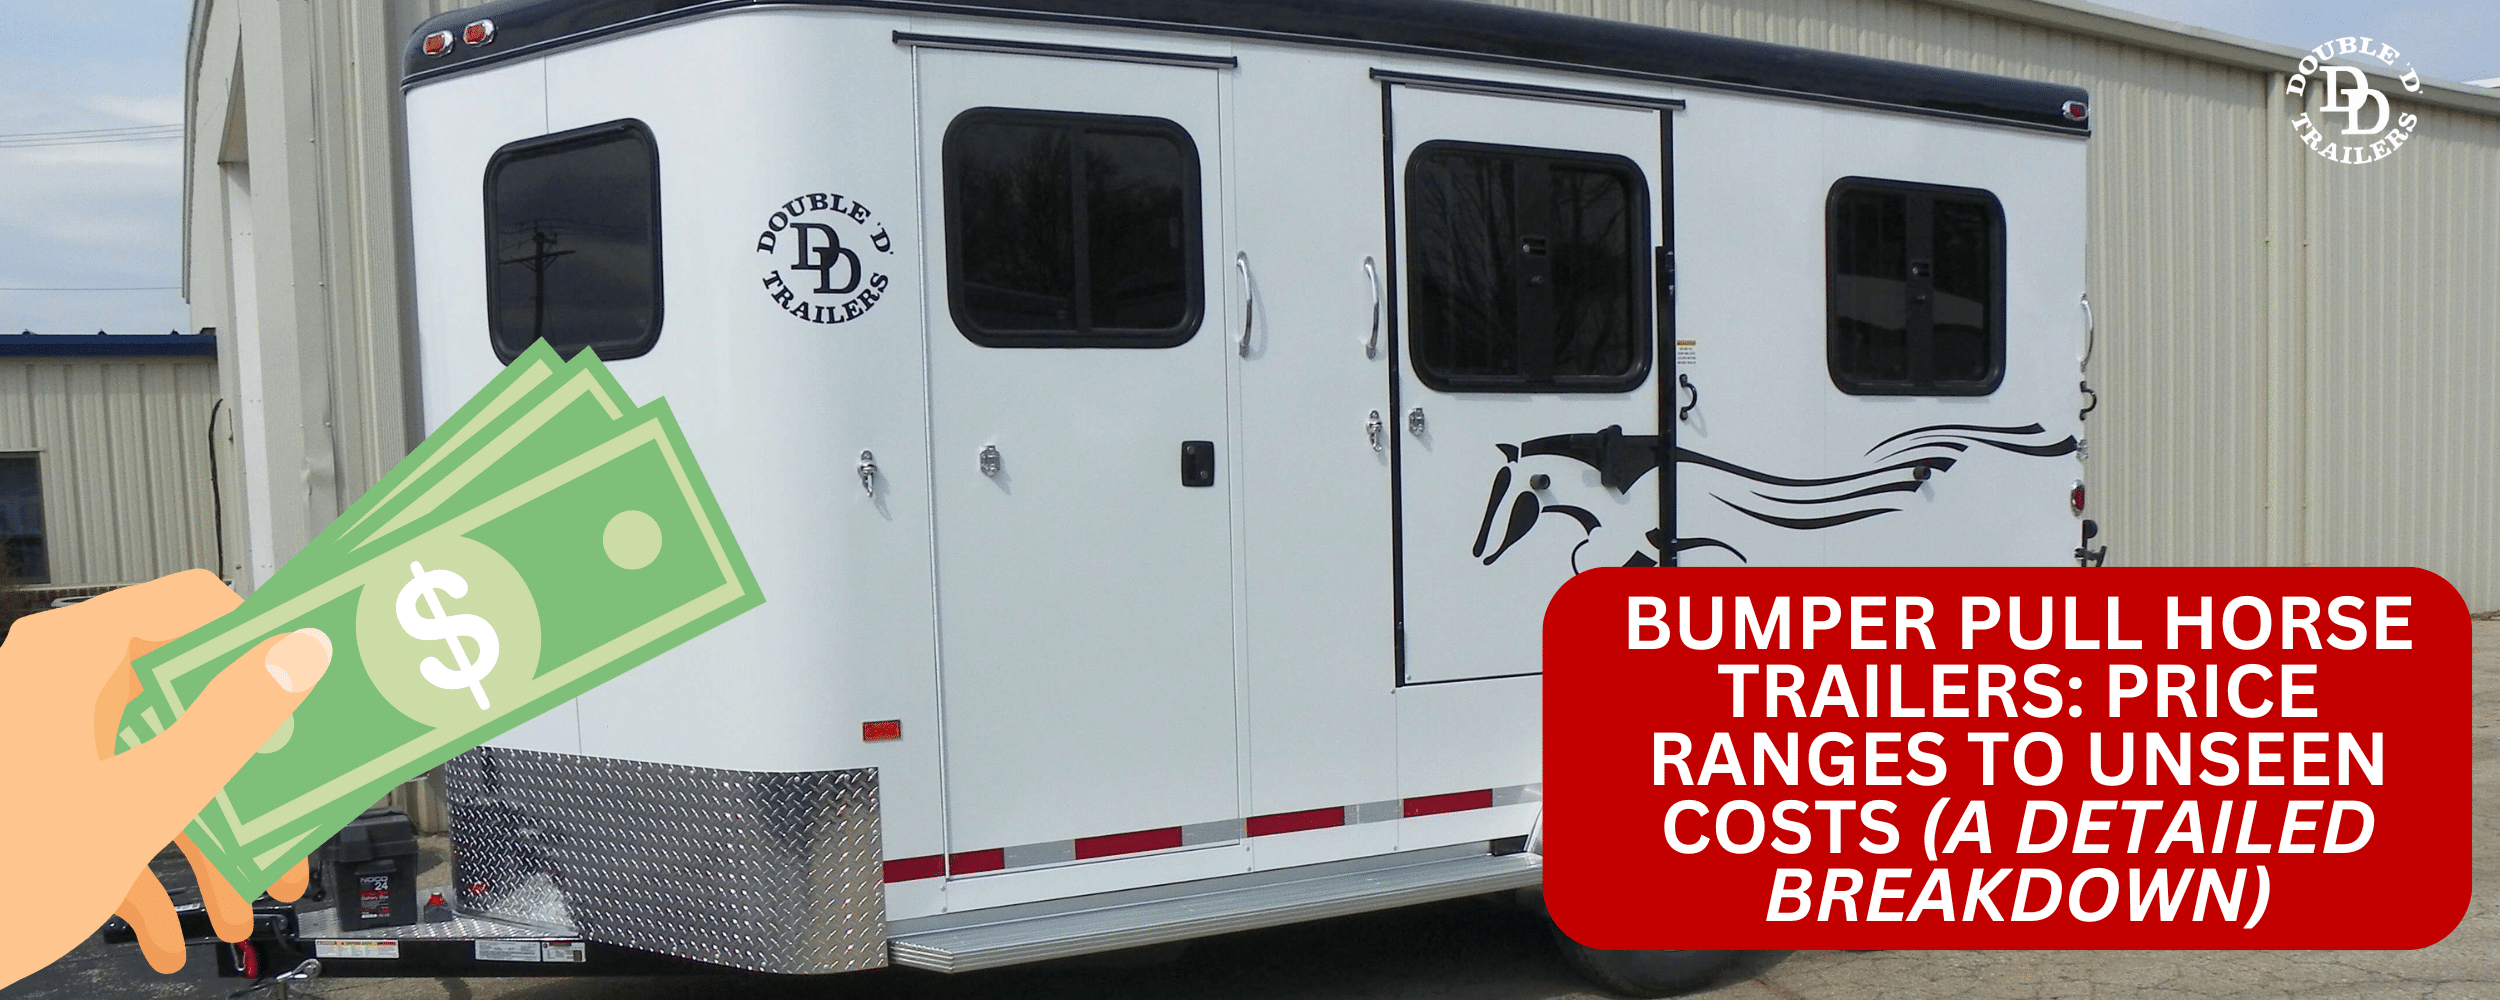 Bumper Pull Horse Trailers: Price Ranges to Unseen Costs Guide by Double D Trailers